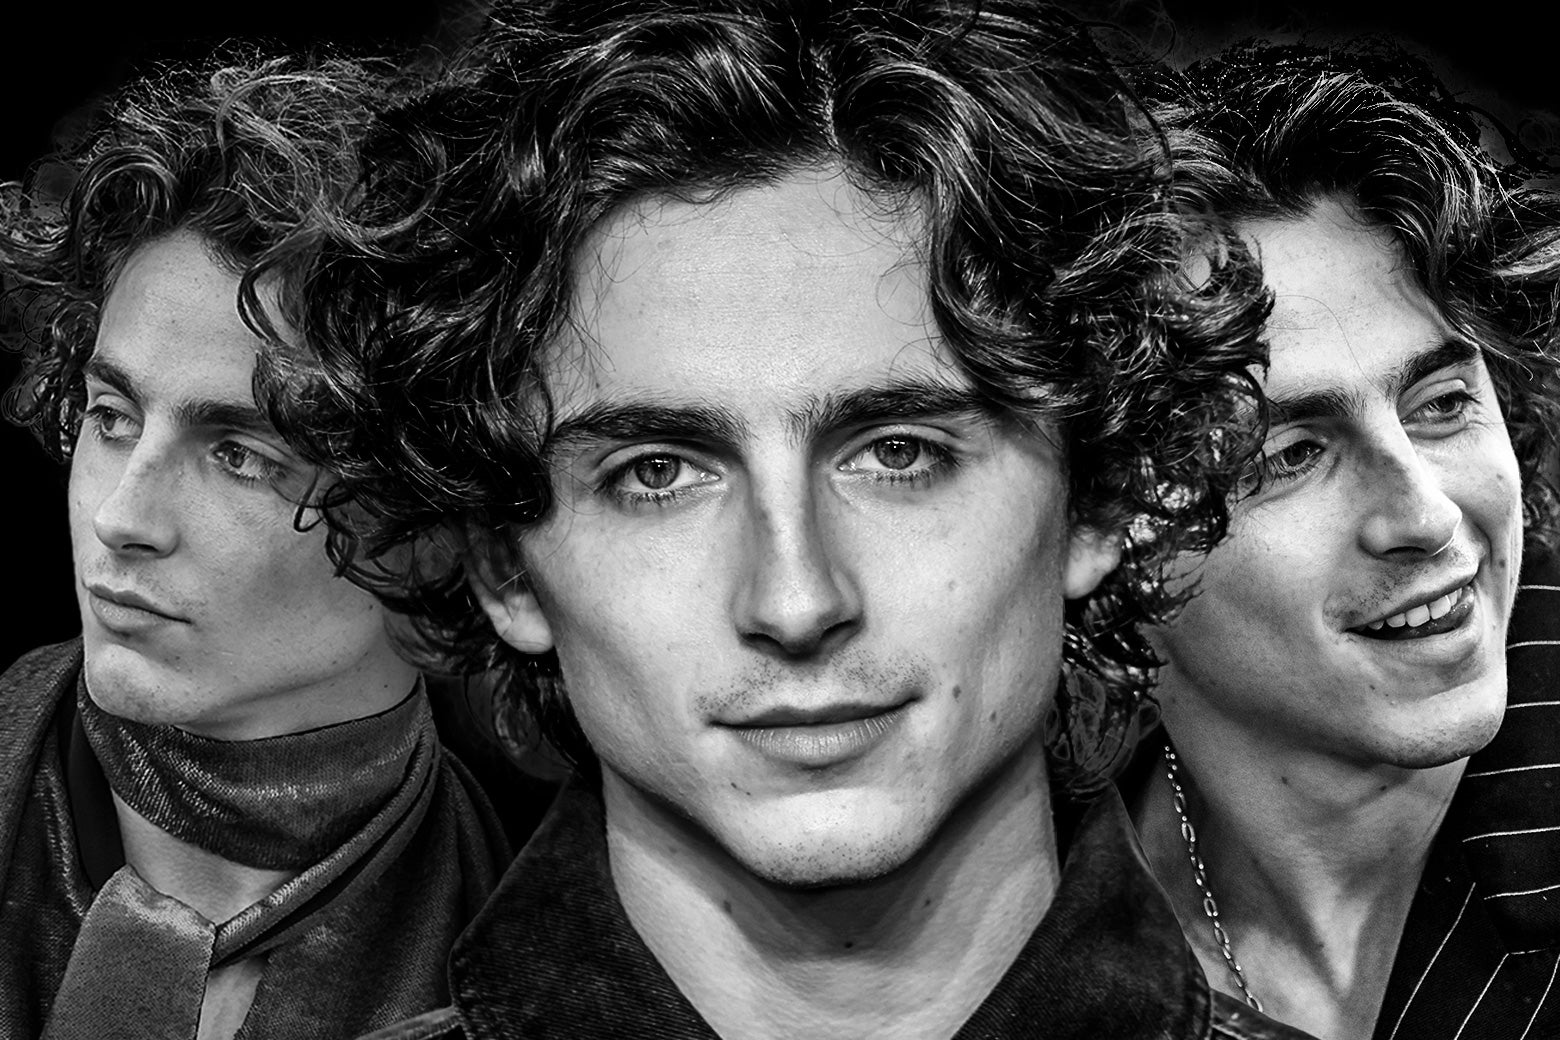 A triptych of the face of Timothee Chalamet: as somber-looking Willy Wonka, impish hip-hop fan, and moody art-house movie boi.